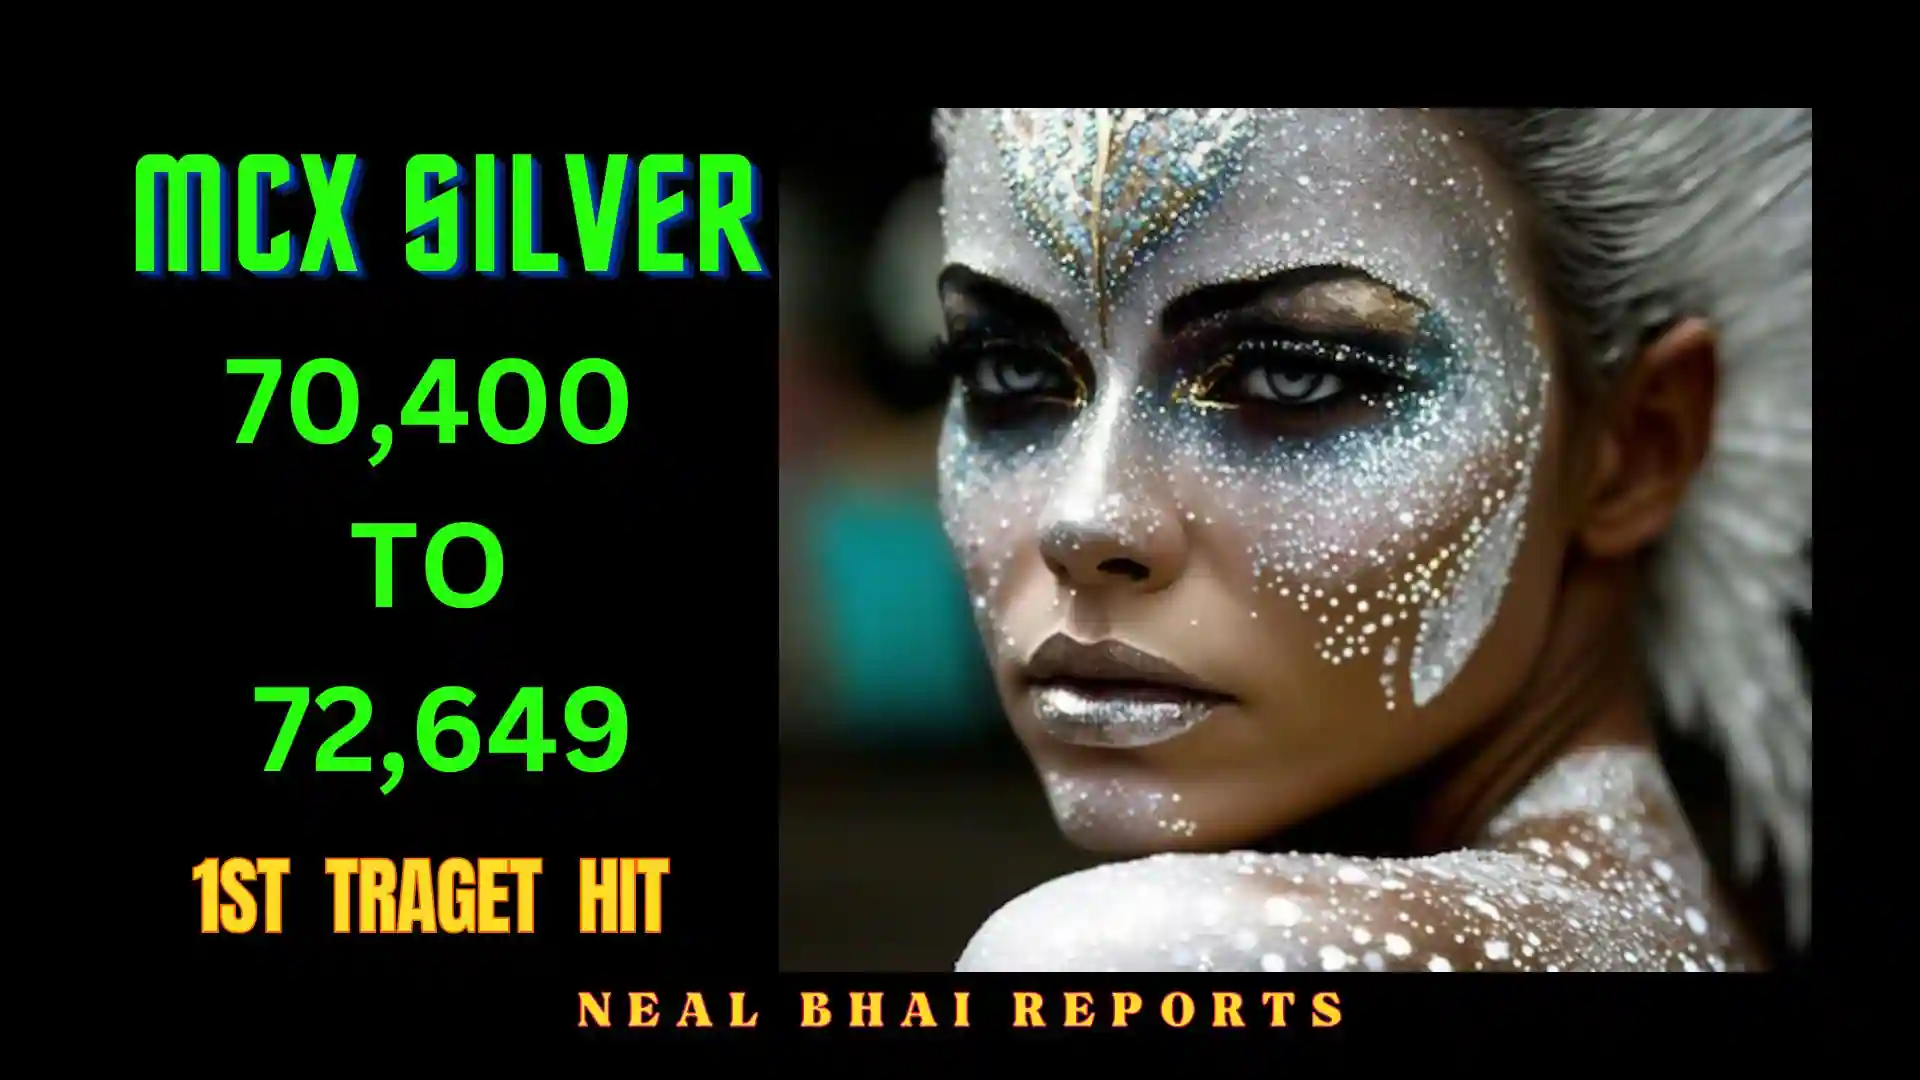 MCX Silver Hit 1st Buy Target 2,249 Points, Profit Rs. 67,500 Per Lot, With in 24 Hours